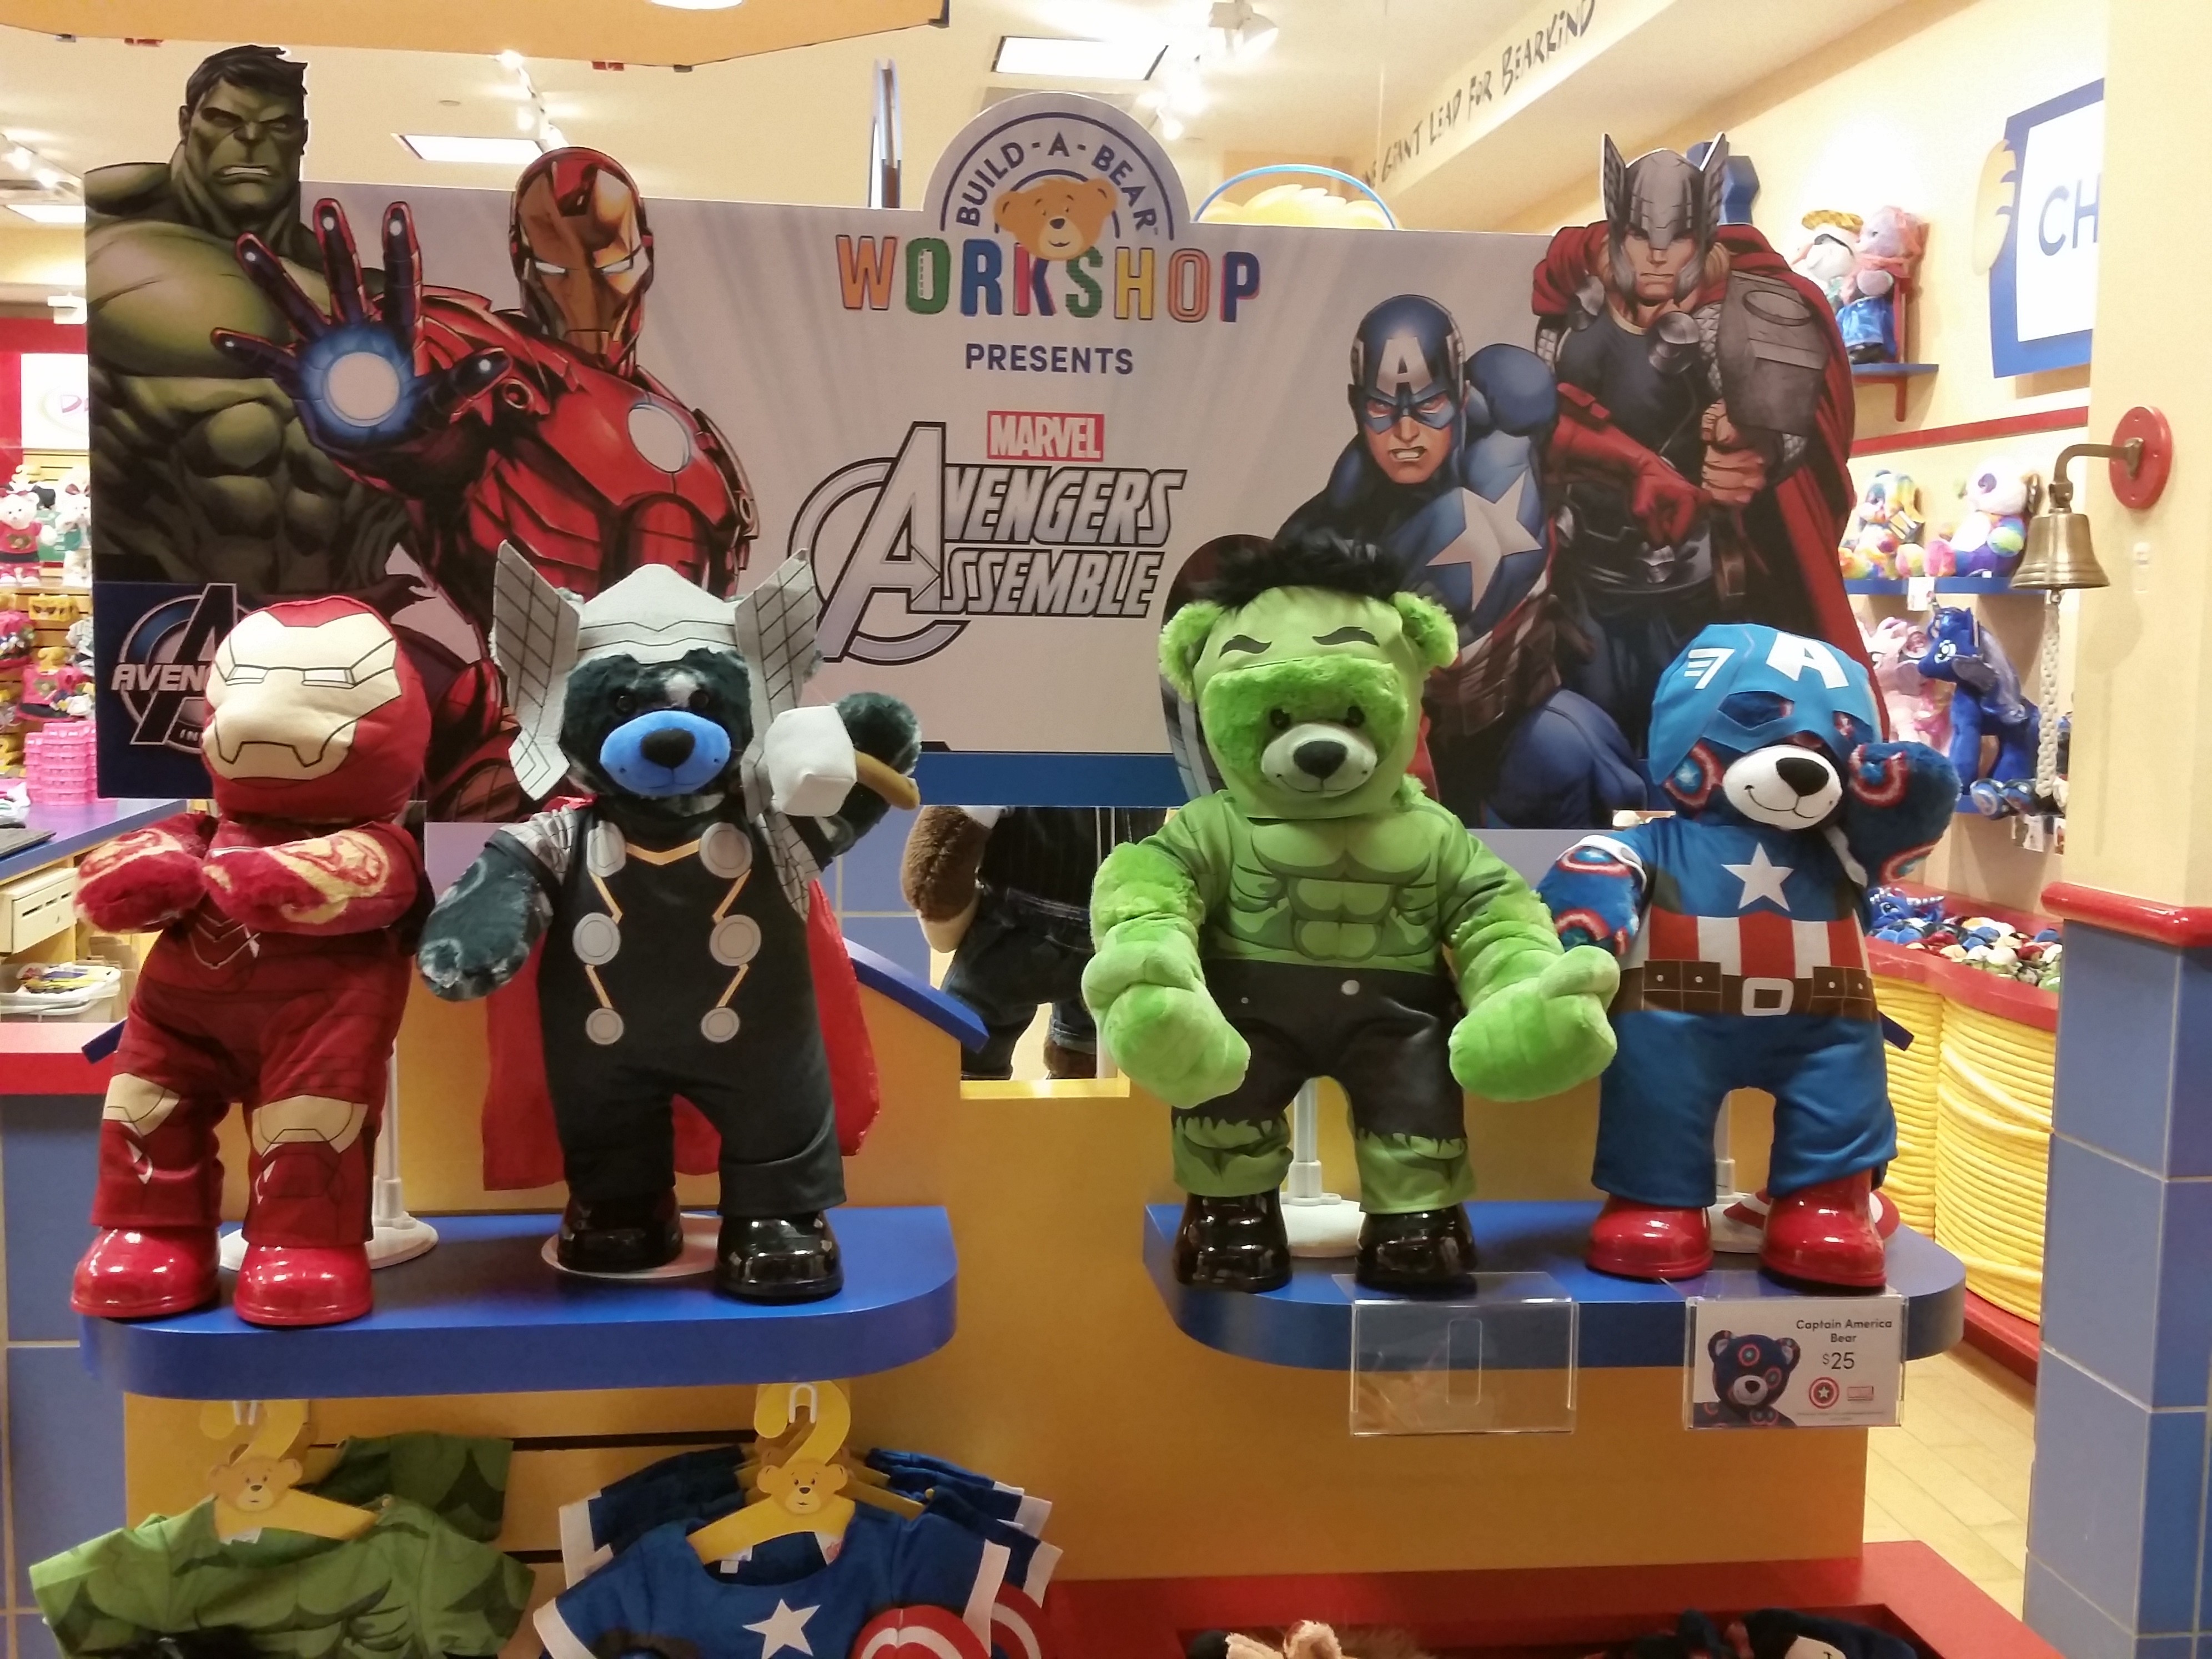 Assemble Your Own Avengers (Bears) at the BuildABear